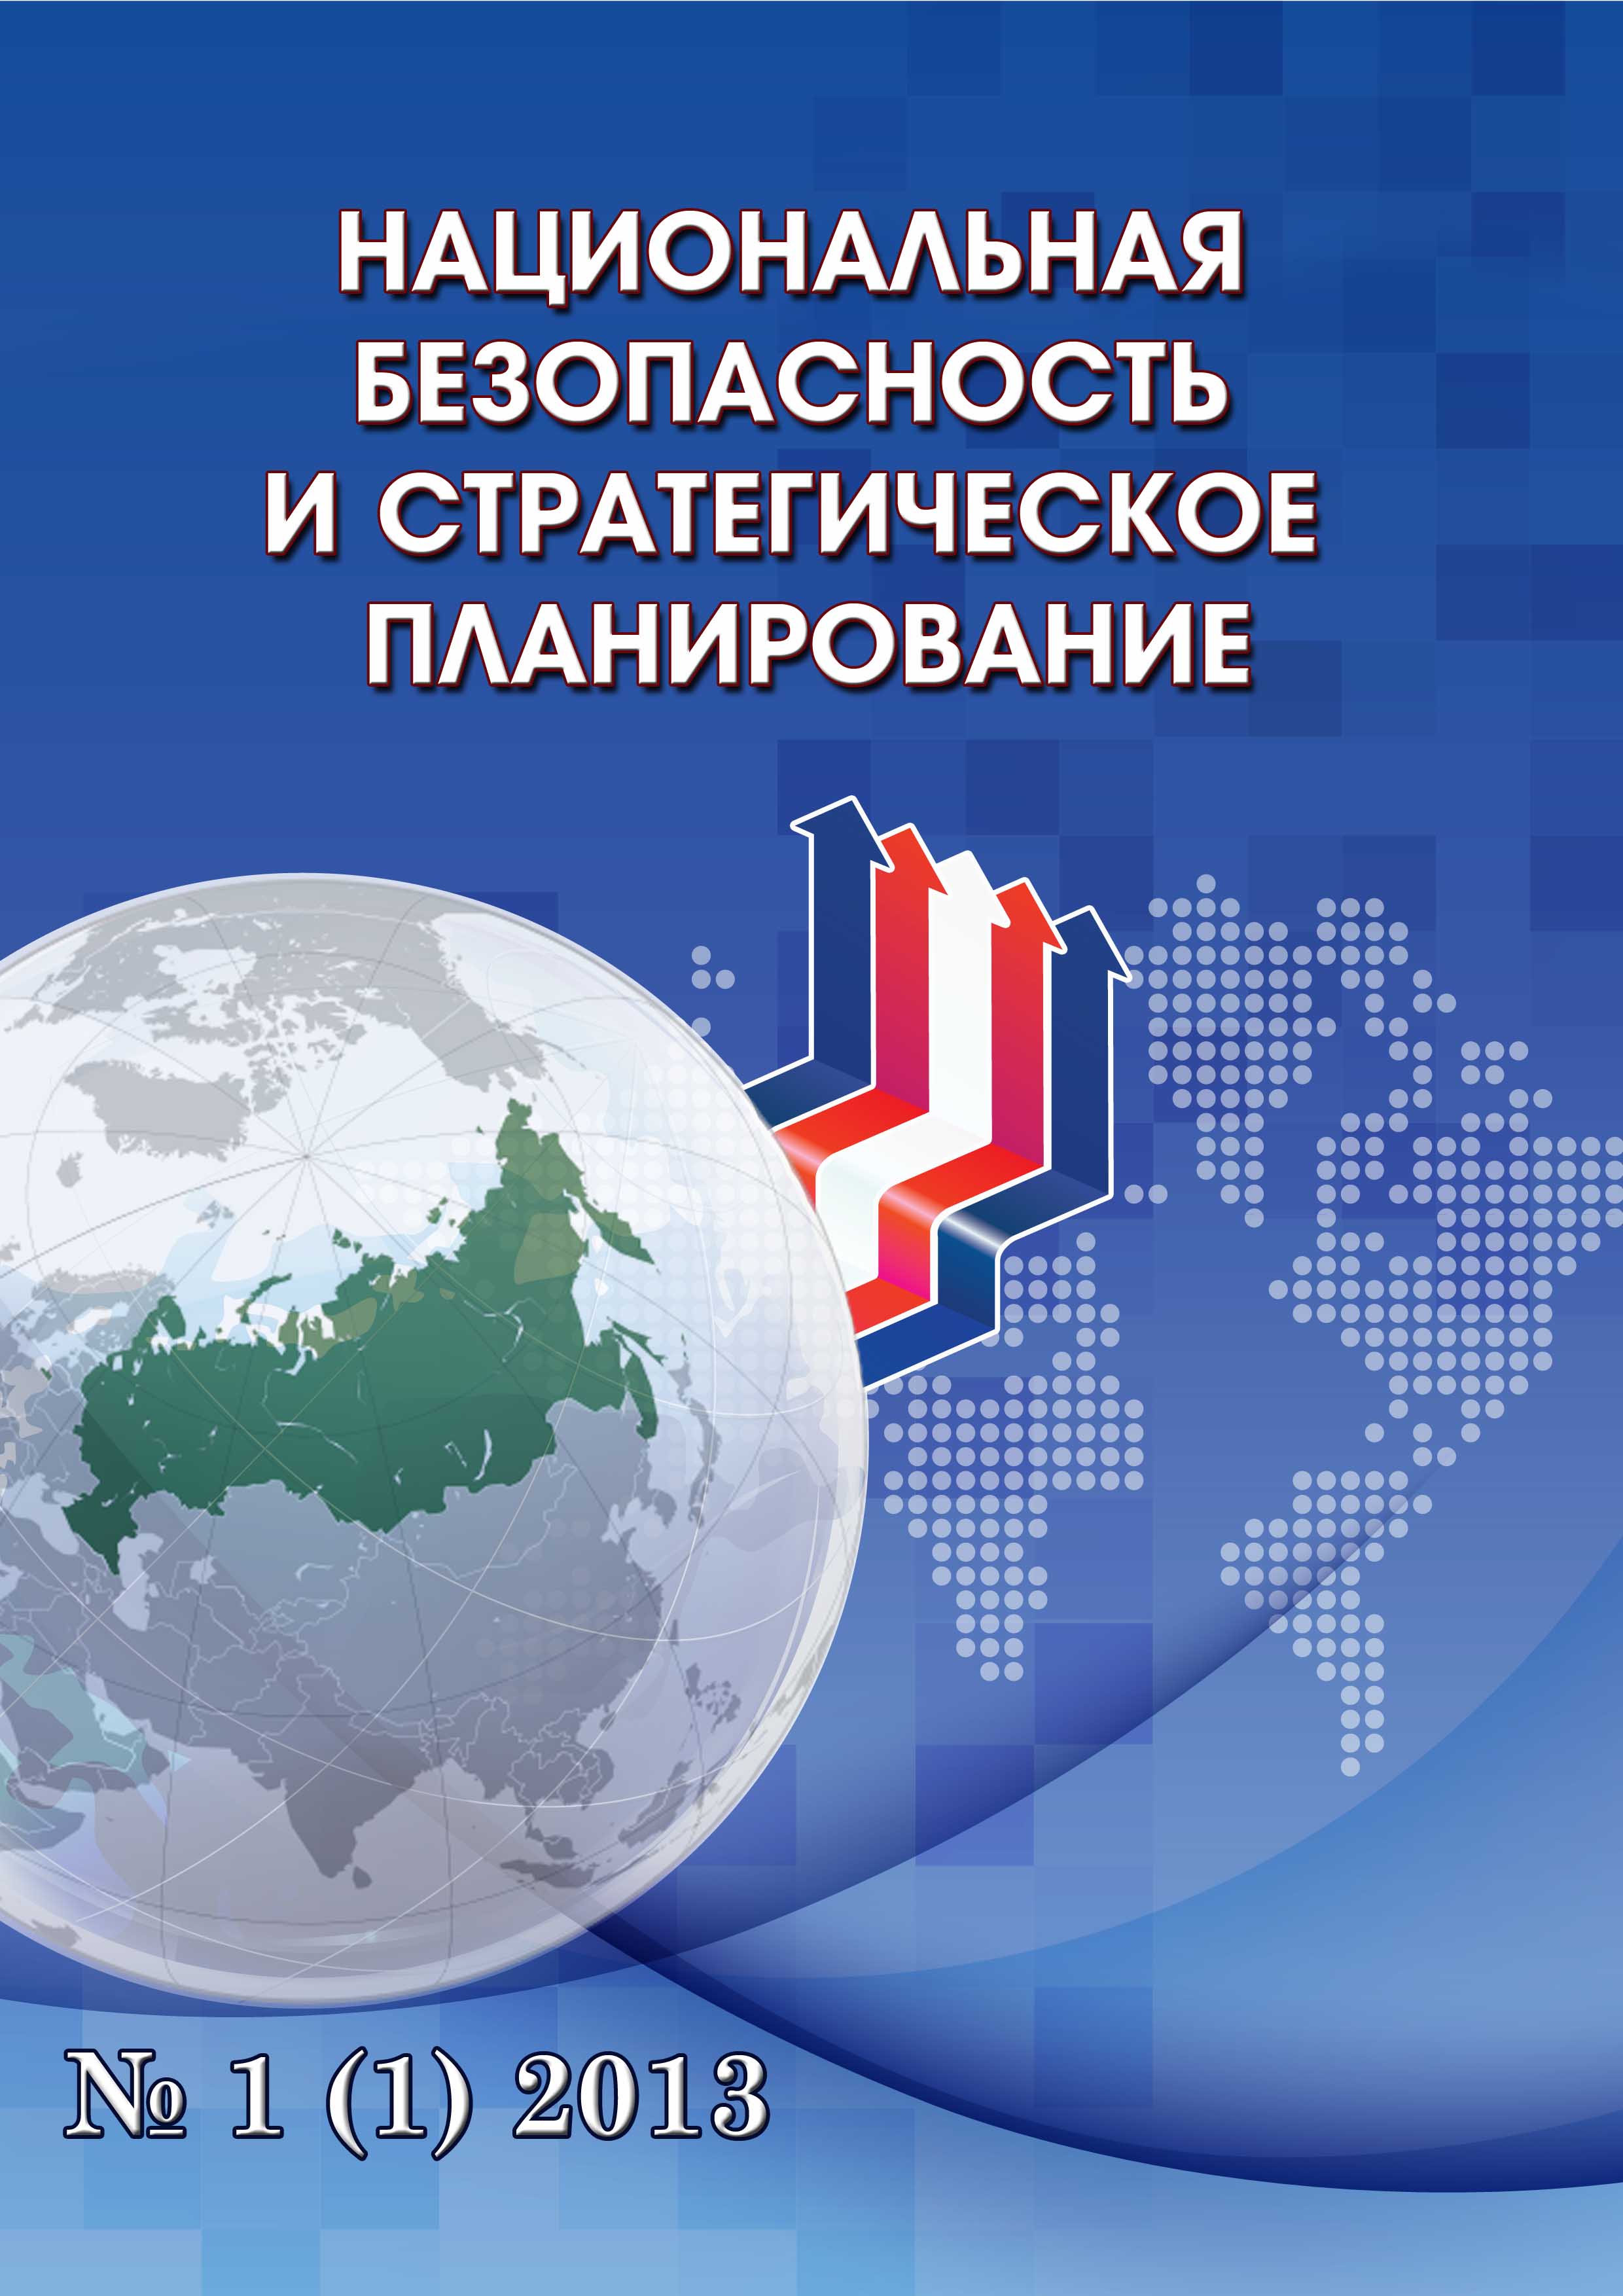                         The corruption as an obstacle to economic growth and development of the Russian Federation
            